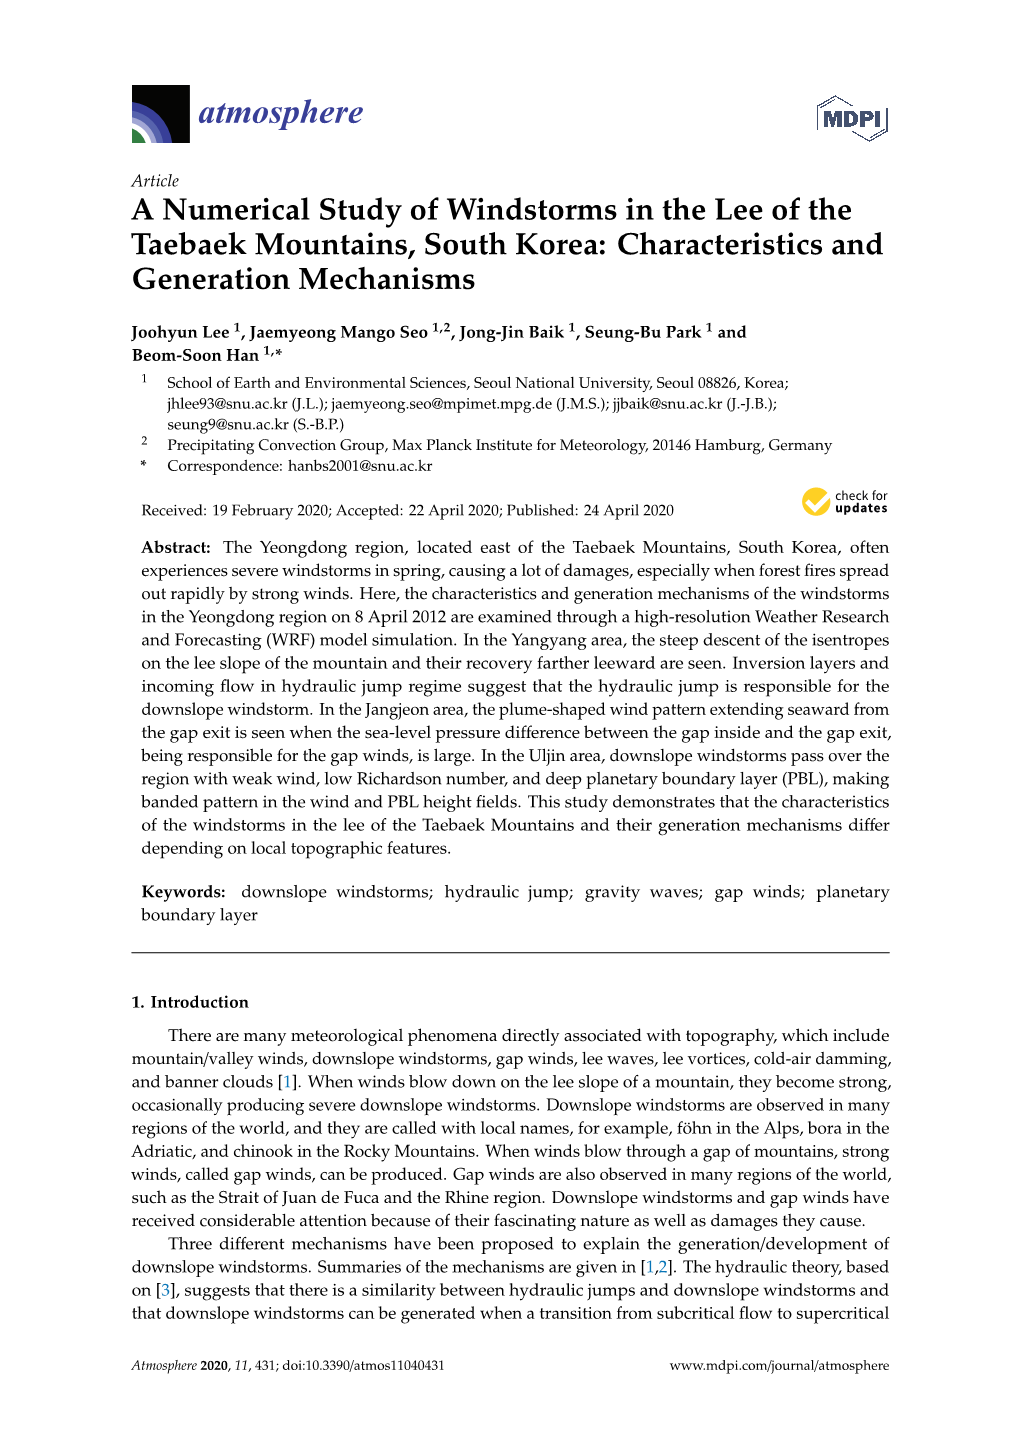 A Numerical Study of Windstorms in the Lee of the Taebaek Mountains, South Korea: Characteristics and Generation Mechanisms